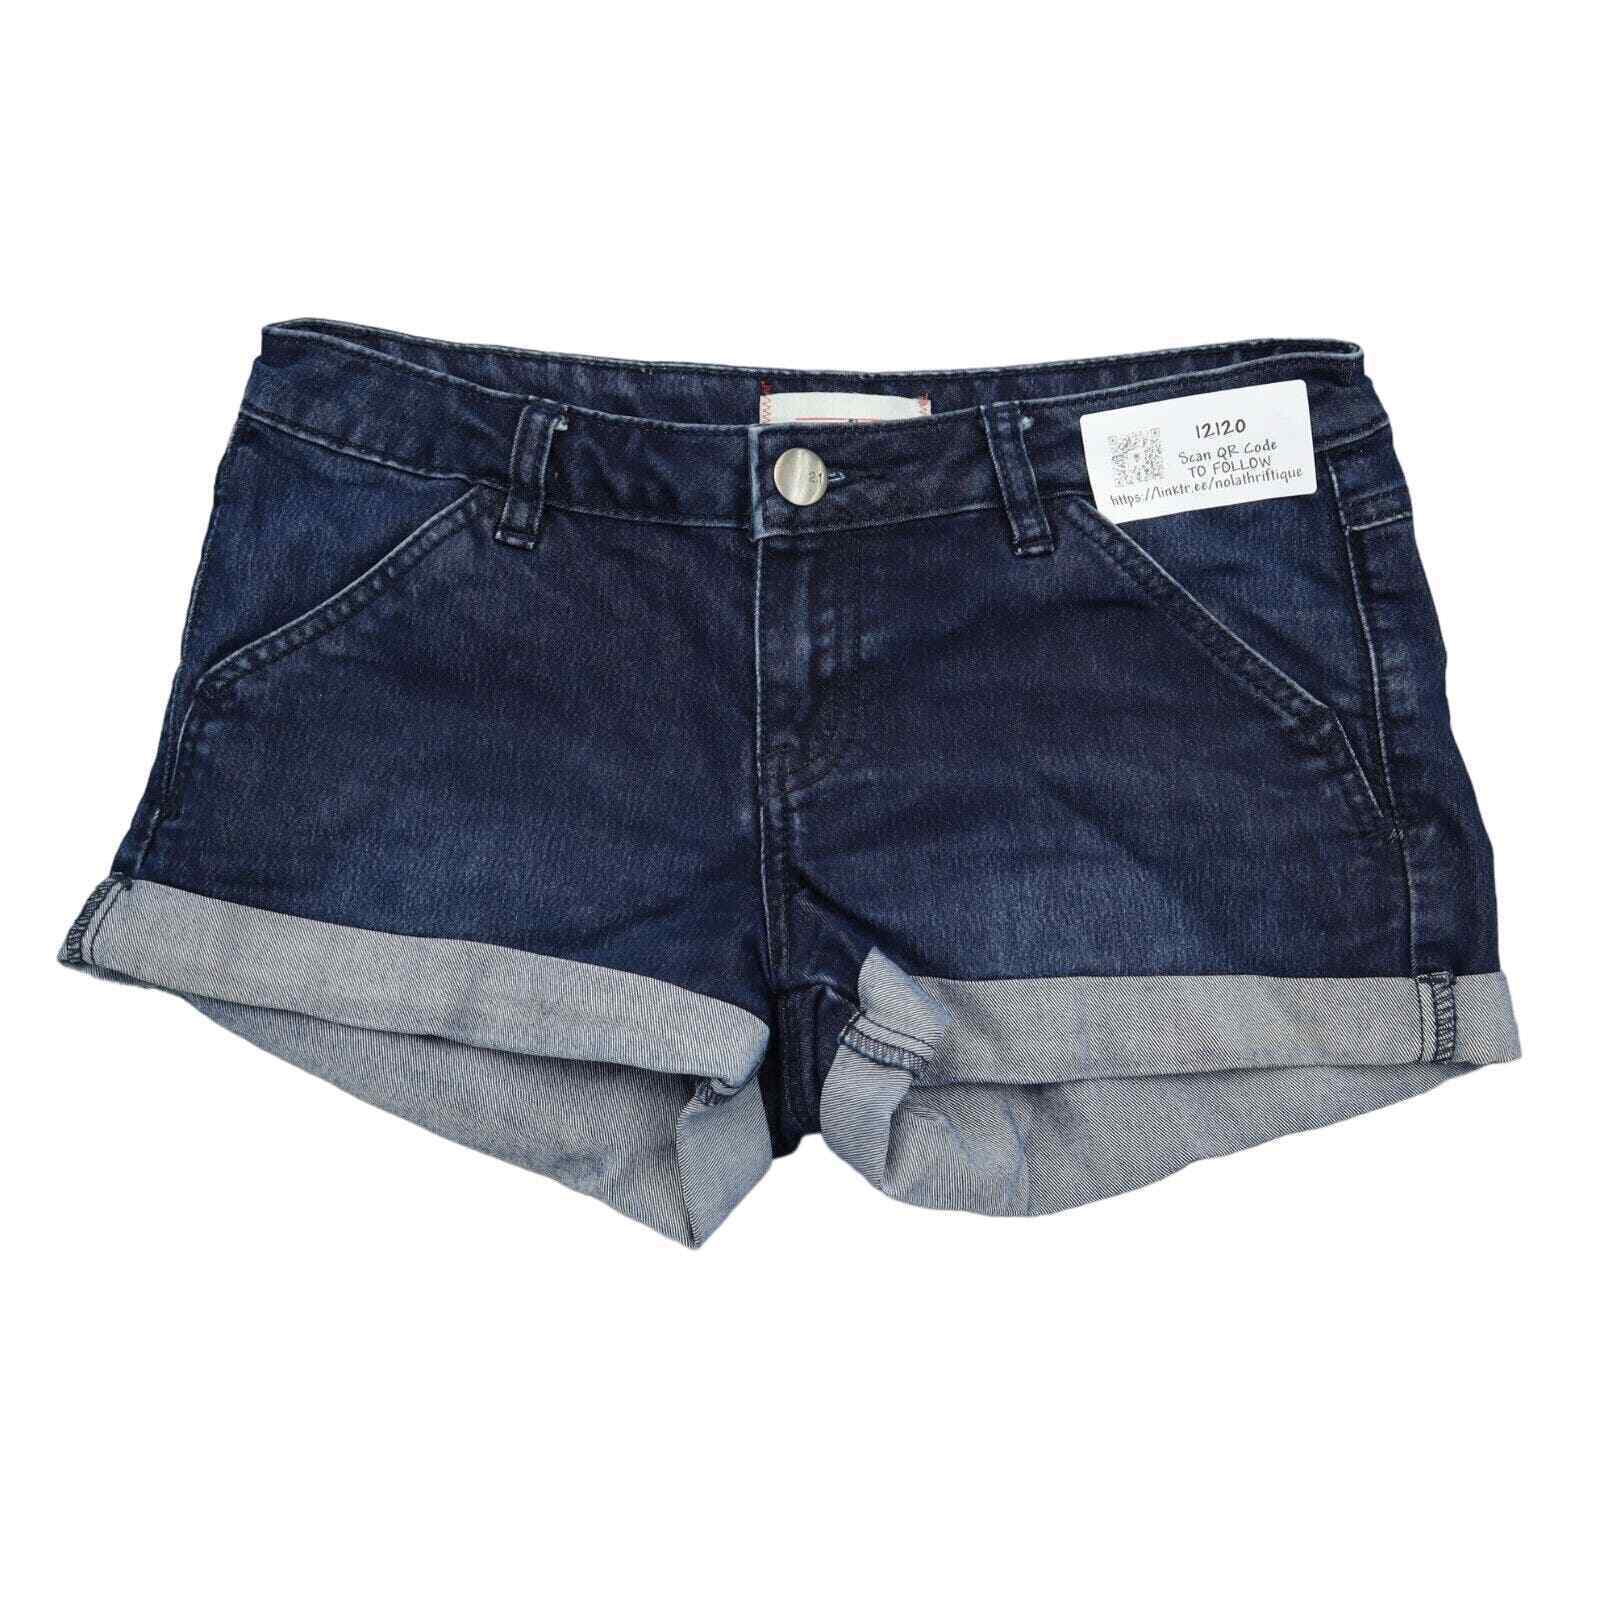 Primary image for 21 Denim Shorts Womens 26 Blue Denim Stretchable Low Rise Casual Hot Pants